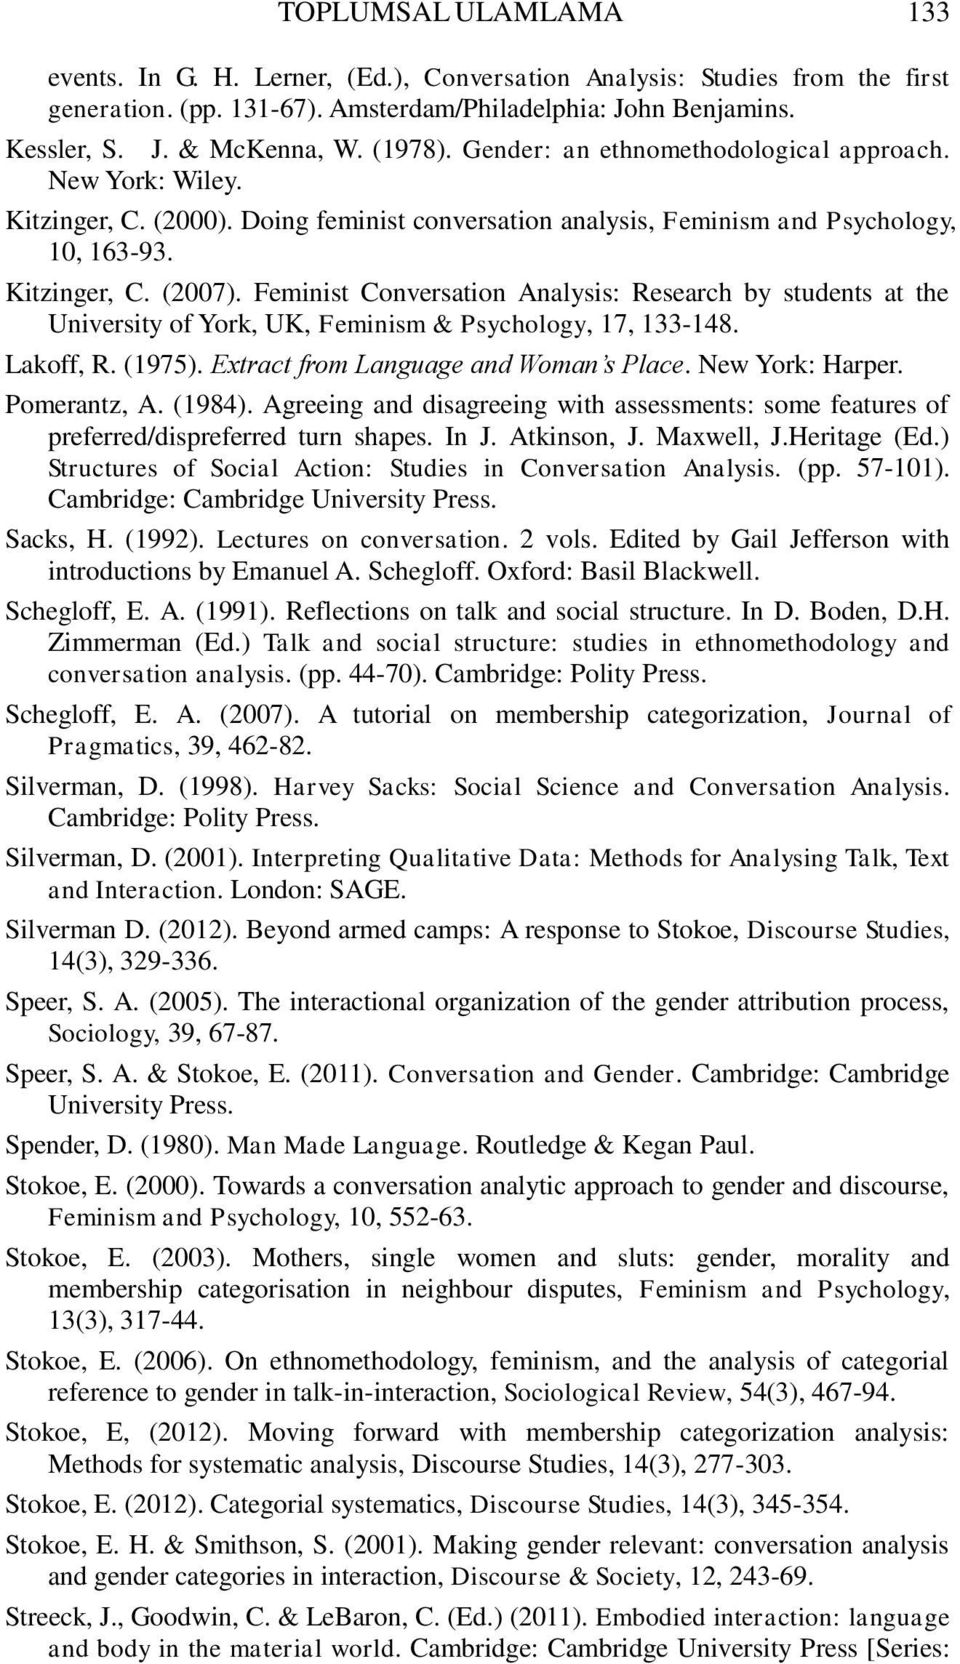 Feminist Conversation Analysis: Research by students at the University of York, UK, Feminism & Psychology, 17, 133-148. Lakoff, R. (1975). Extract from Language and Woman s Place. New York: Harper.